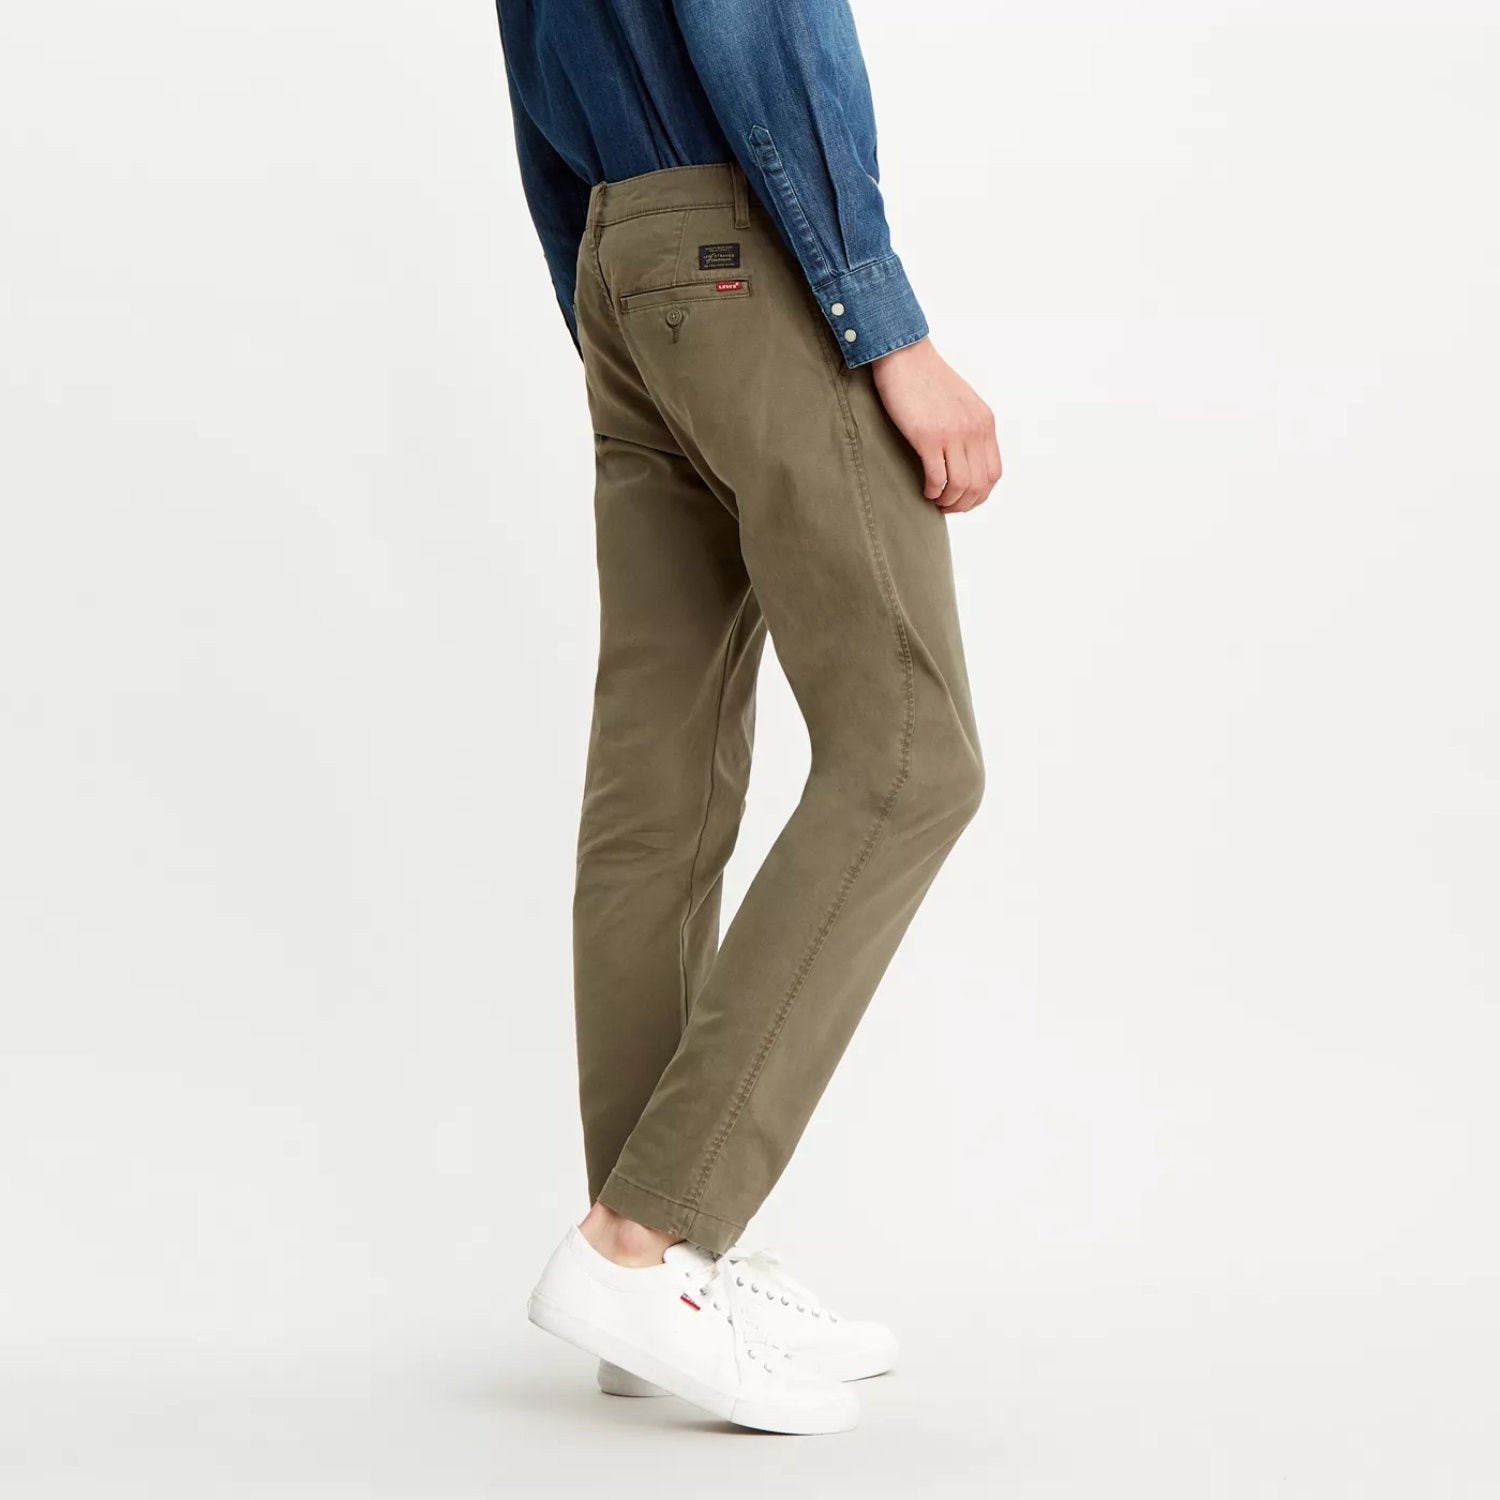 Levis Xx Standard Taper Chino Pants - Shady - 2 - Bottoms - Casual Pants